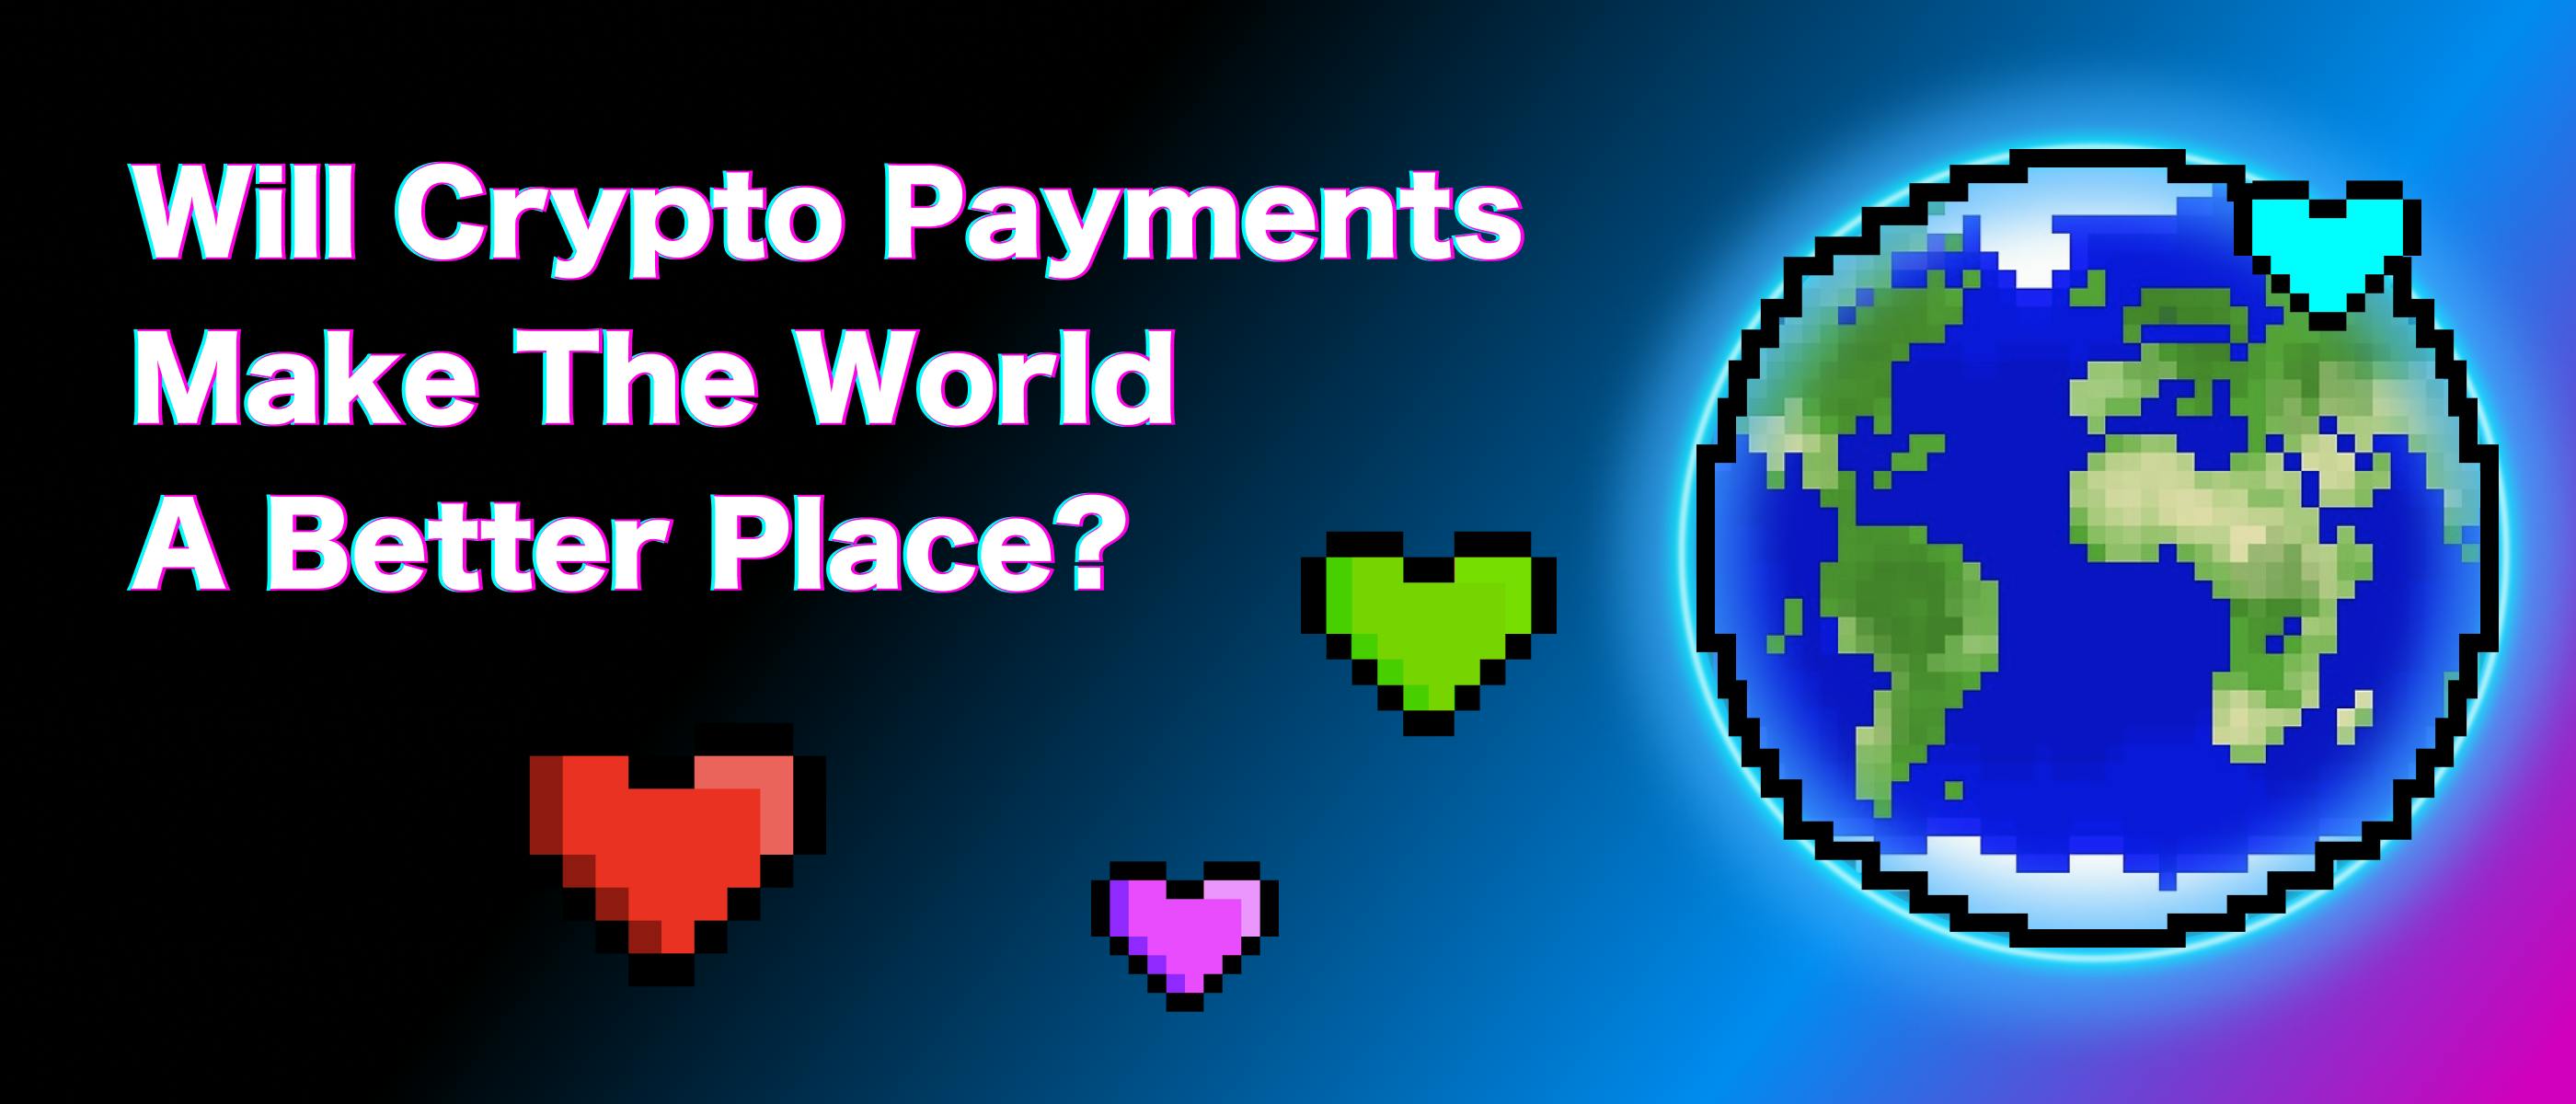 featured image - Will Crypto Payments Make The World A Better Place?